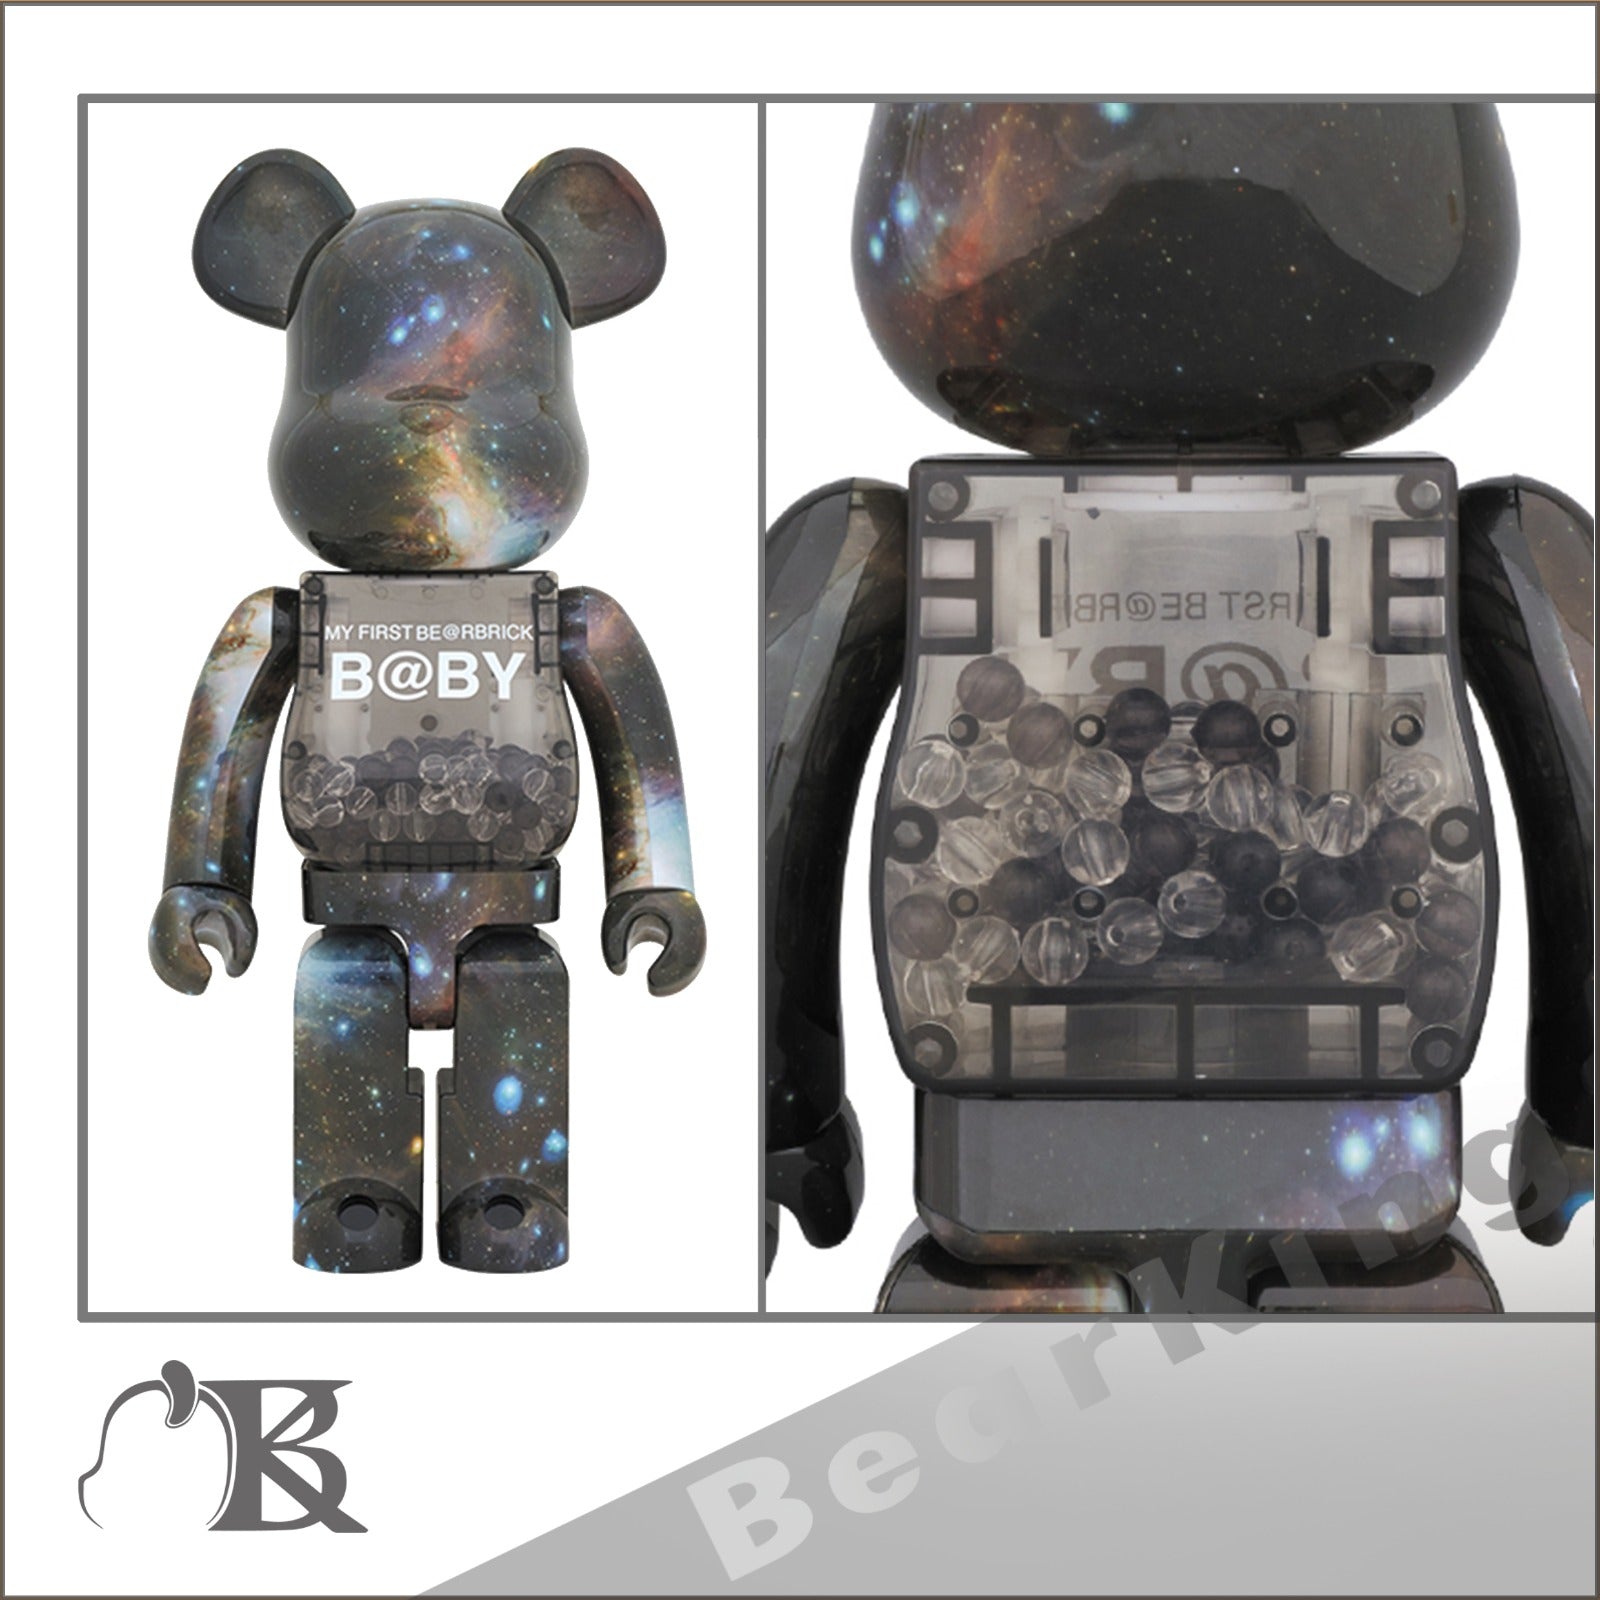 MY FIRST BE@RBRICK B@BY SPACE Ver.1000％ 千秋 Baby 星空